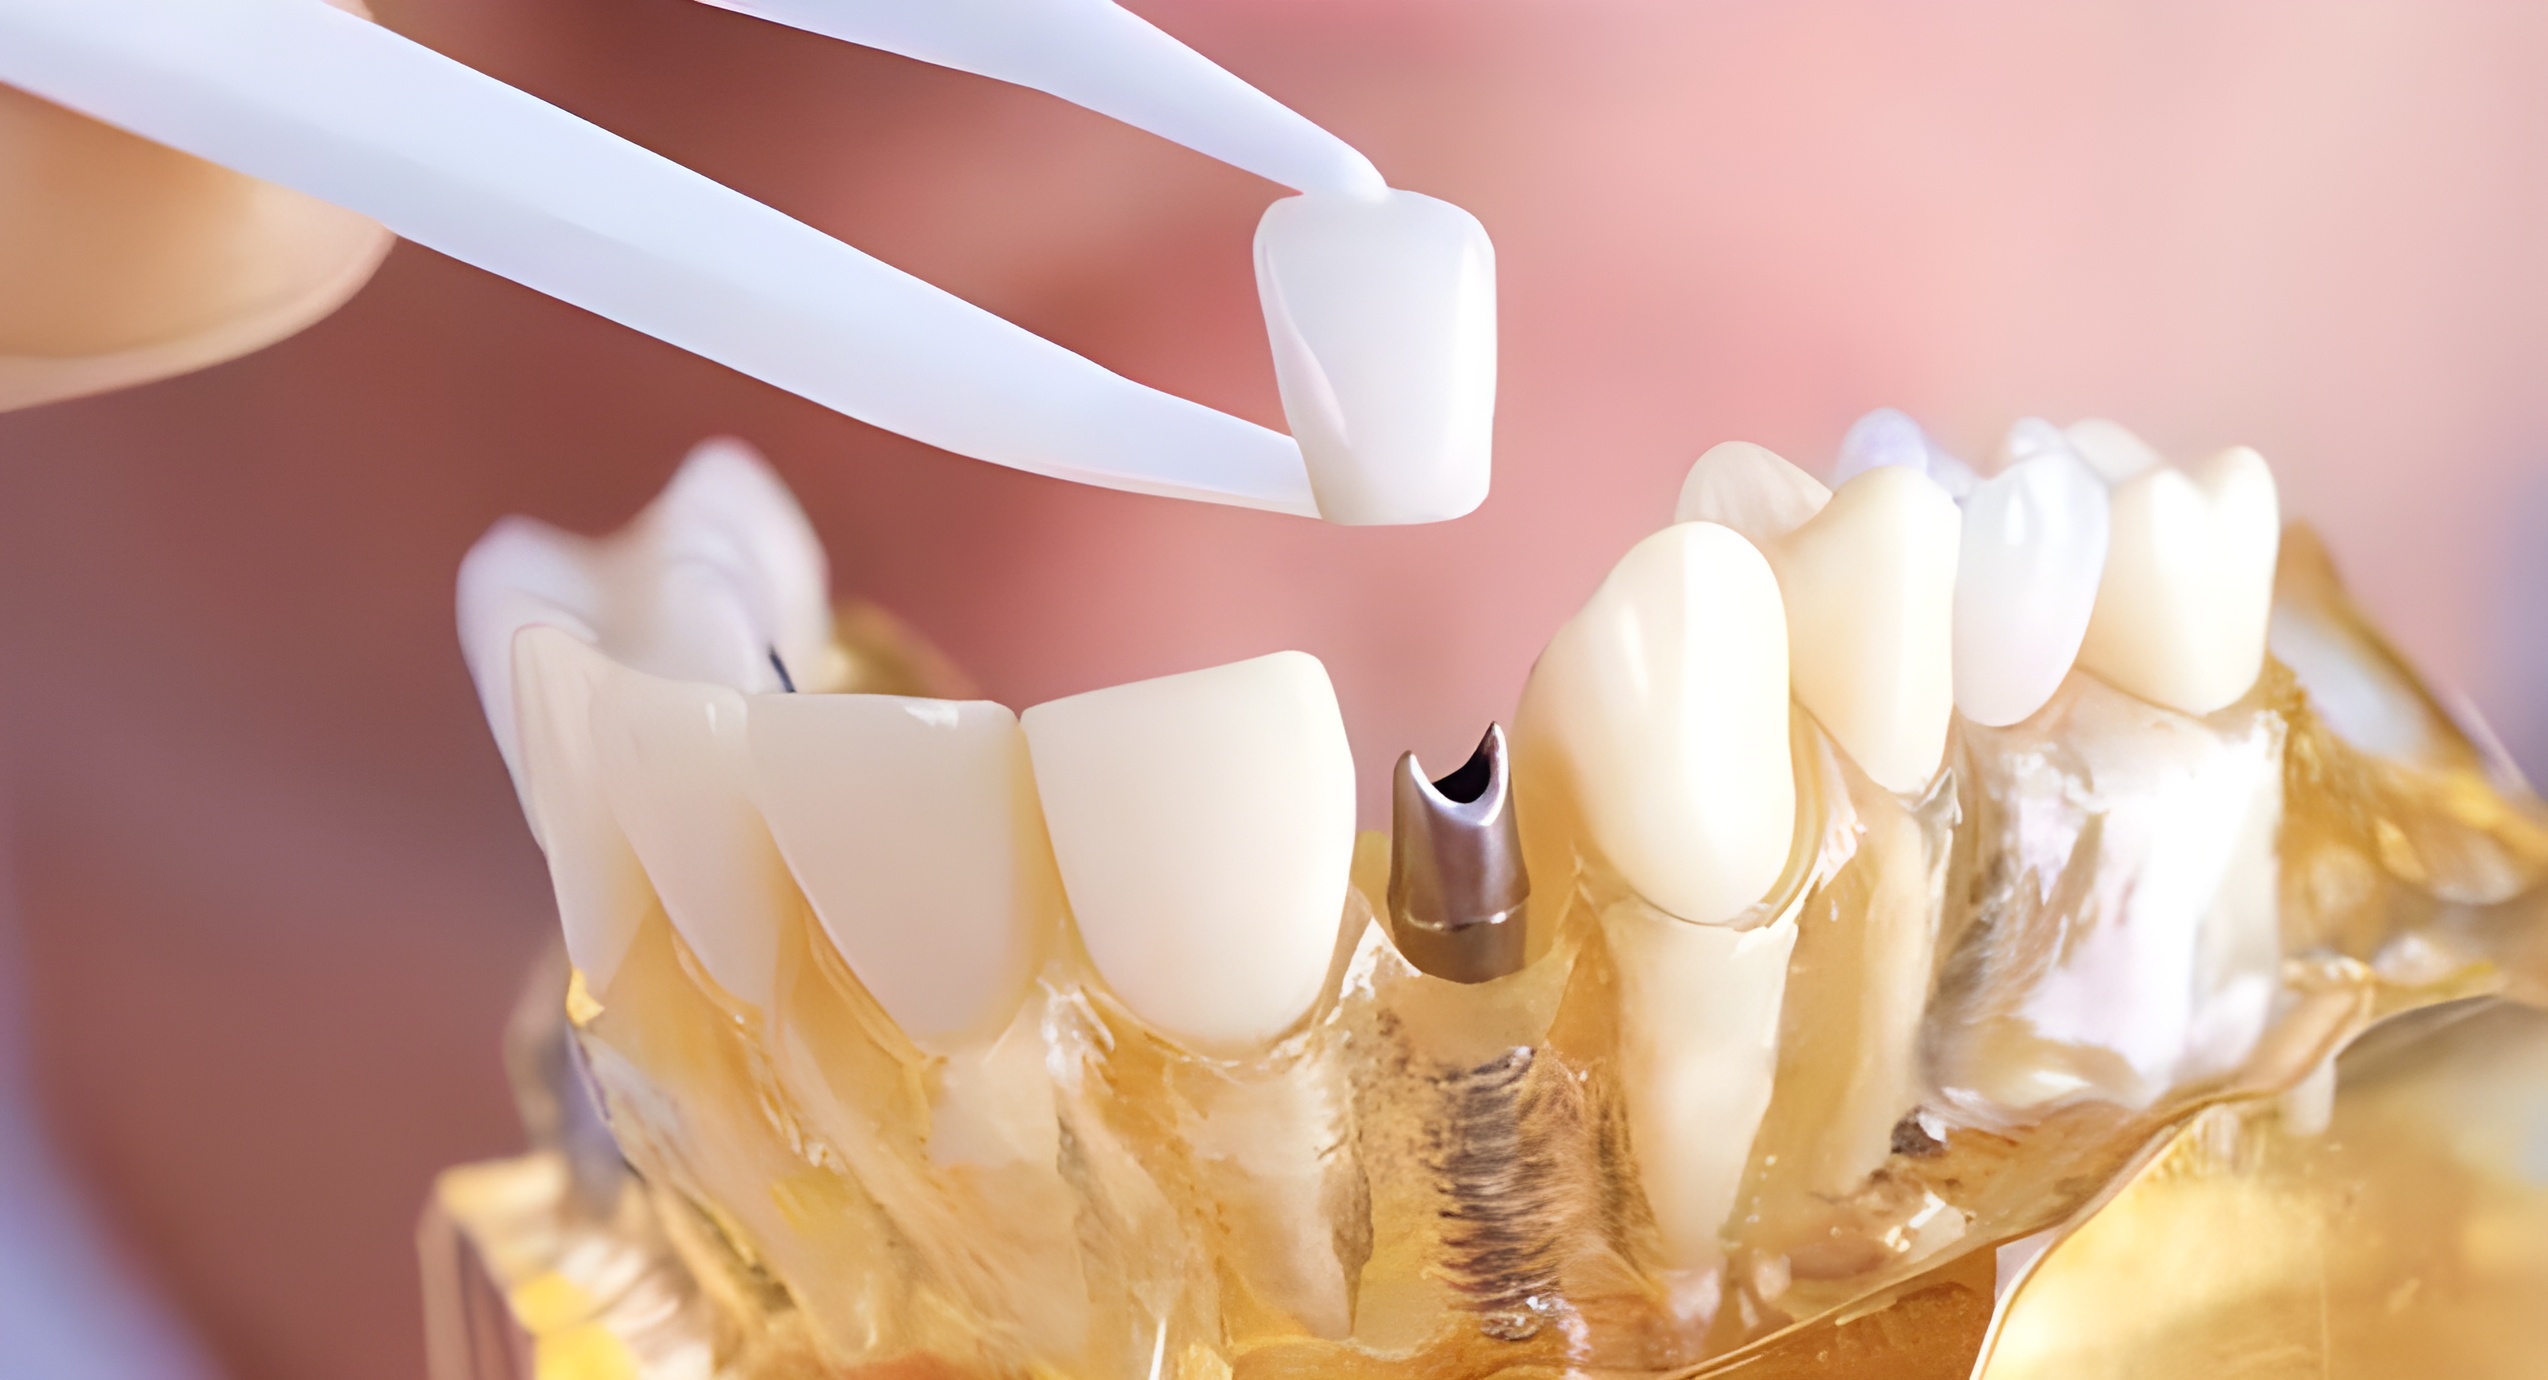 Dental crowns: main types of crowns